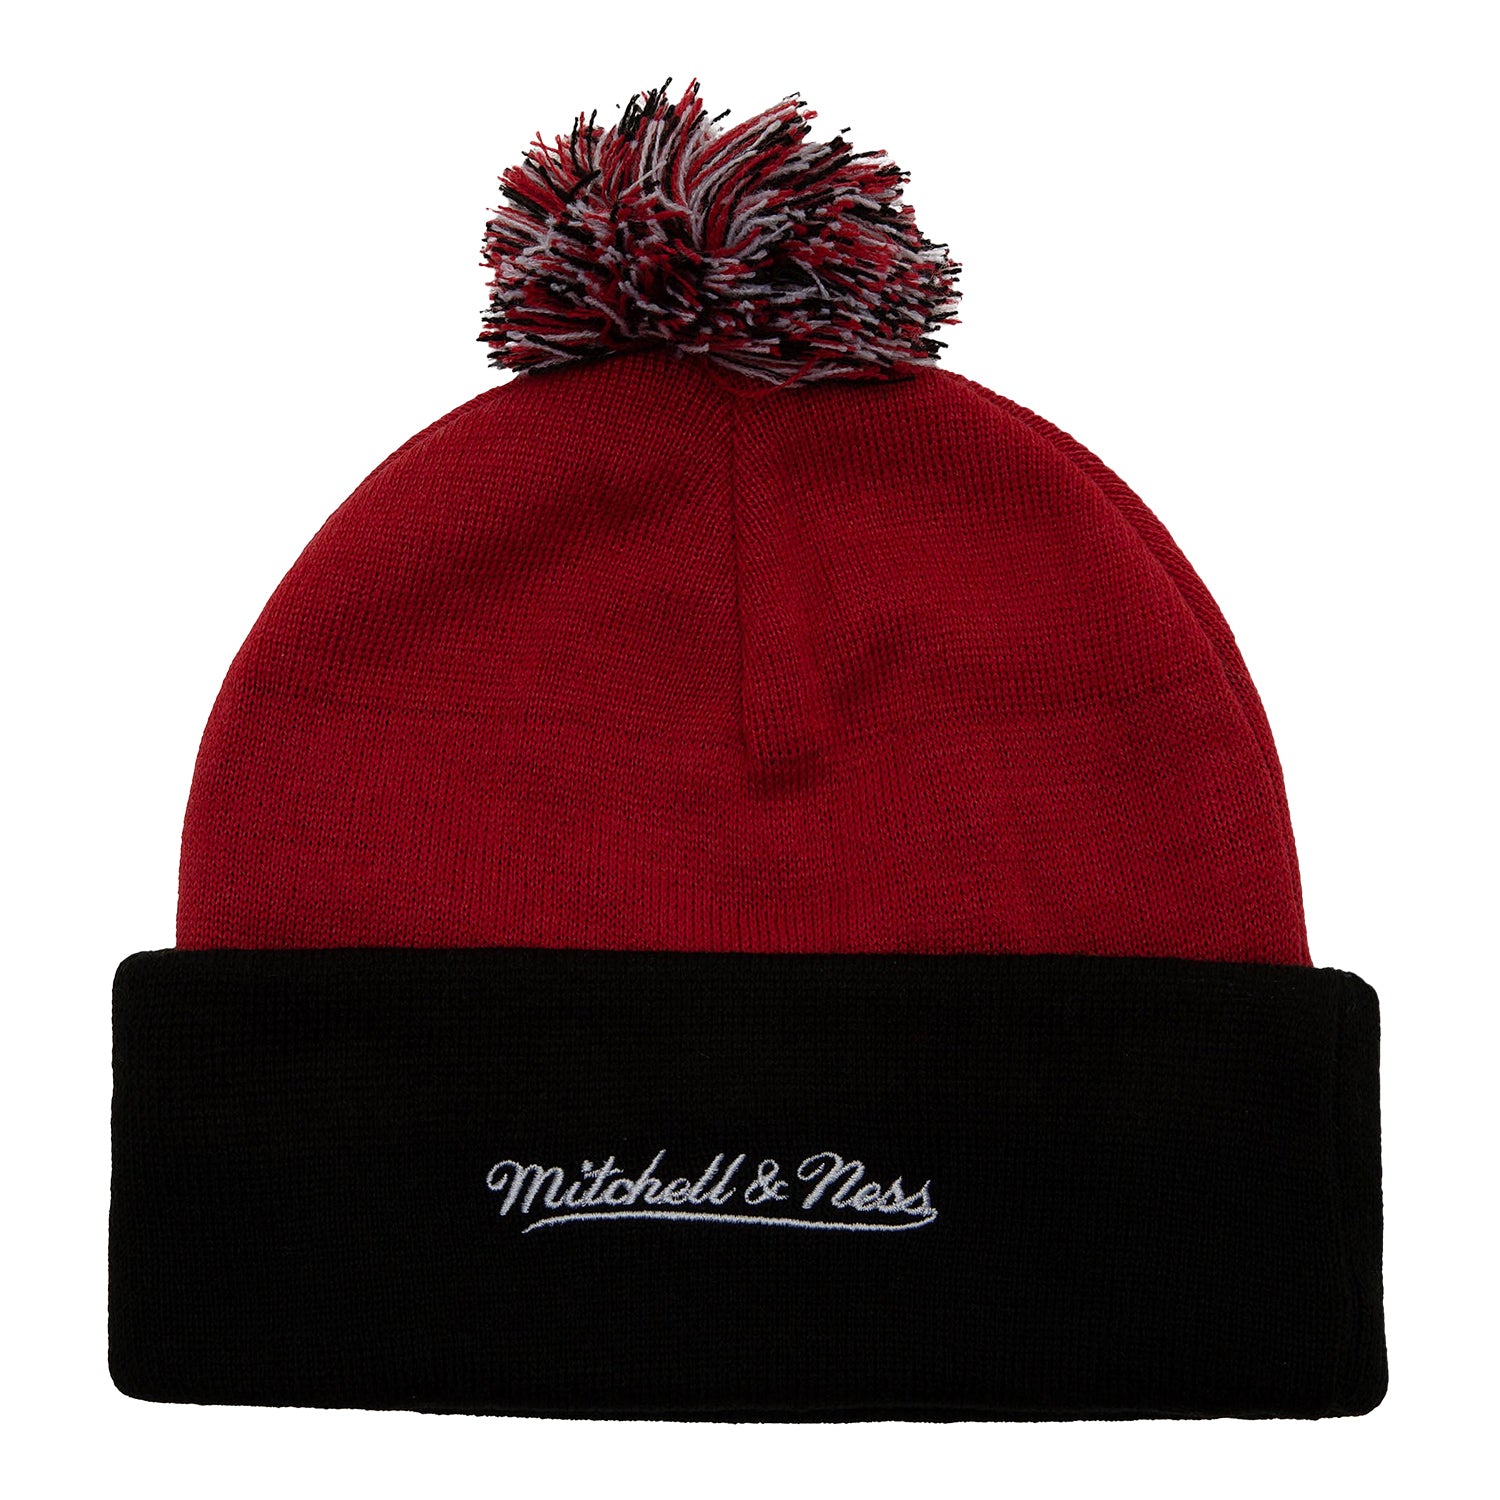 Chicago Bulls M&N Double Take Knit Hat in black and red - back view